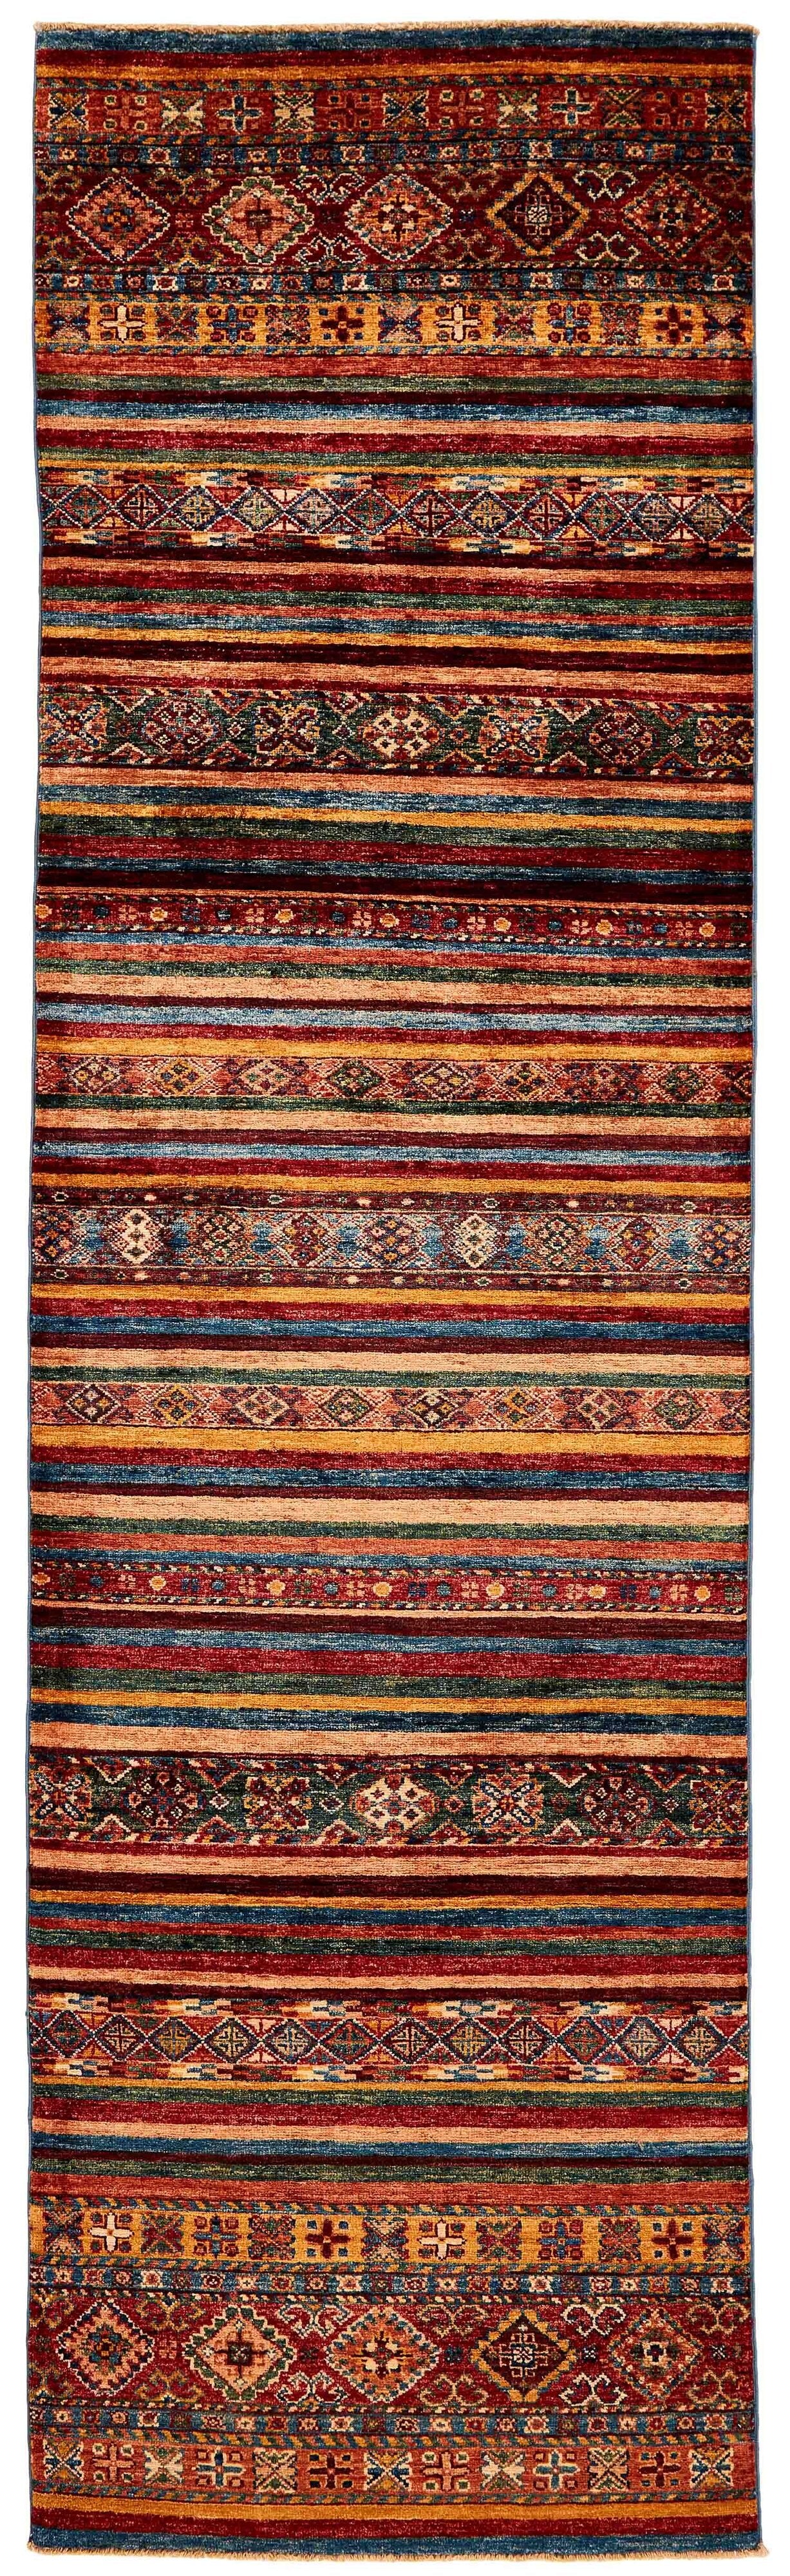 Authentic oriental runner with traditional pattern in red, pink, orange, yellow, blue, green, beige and brown